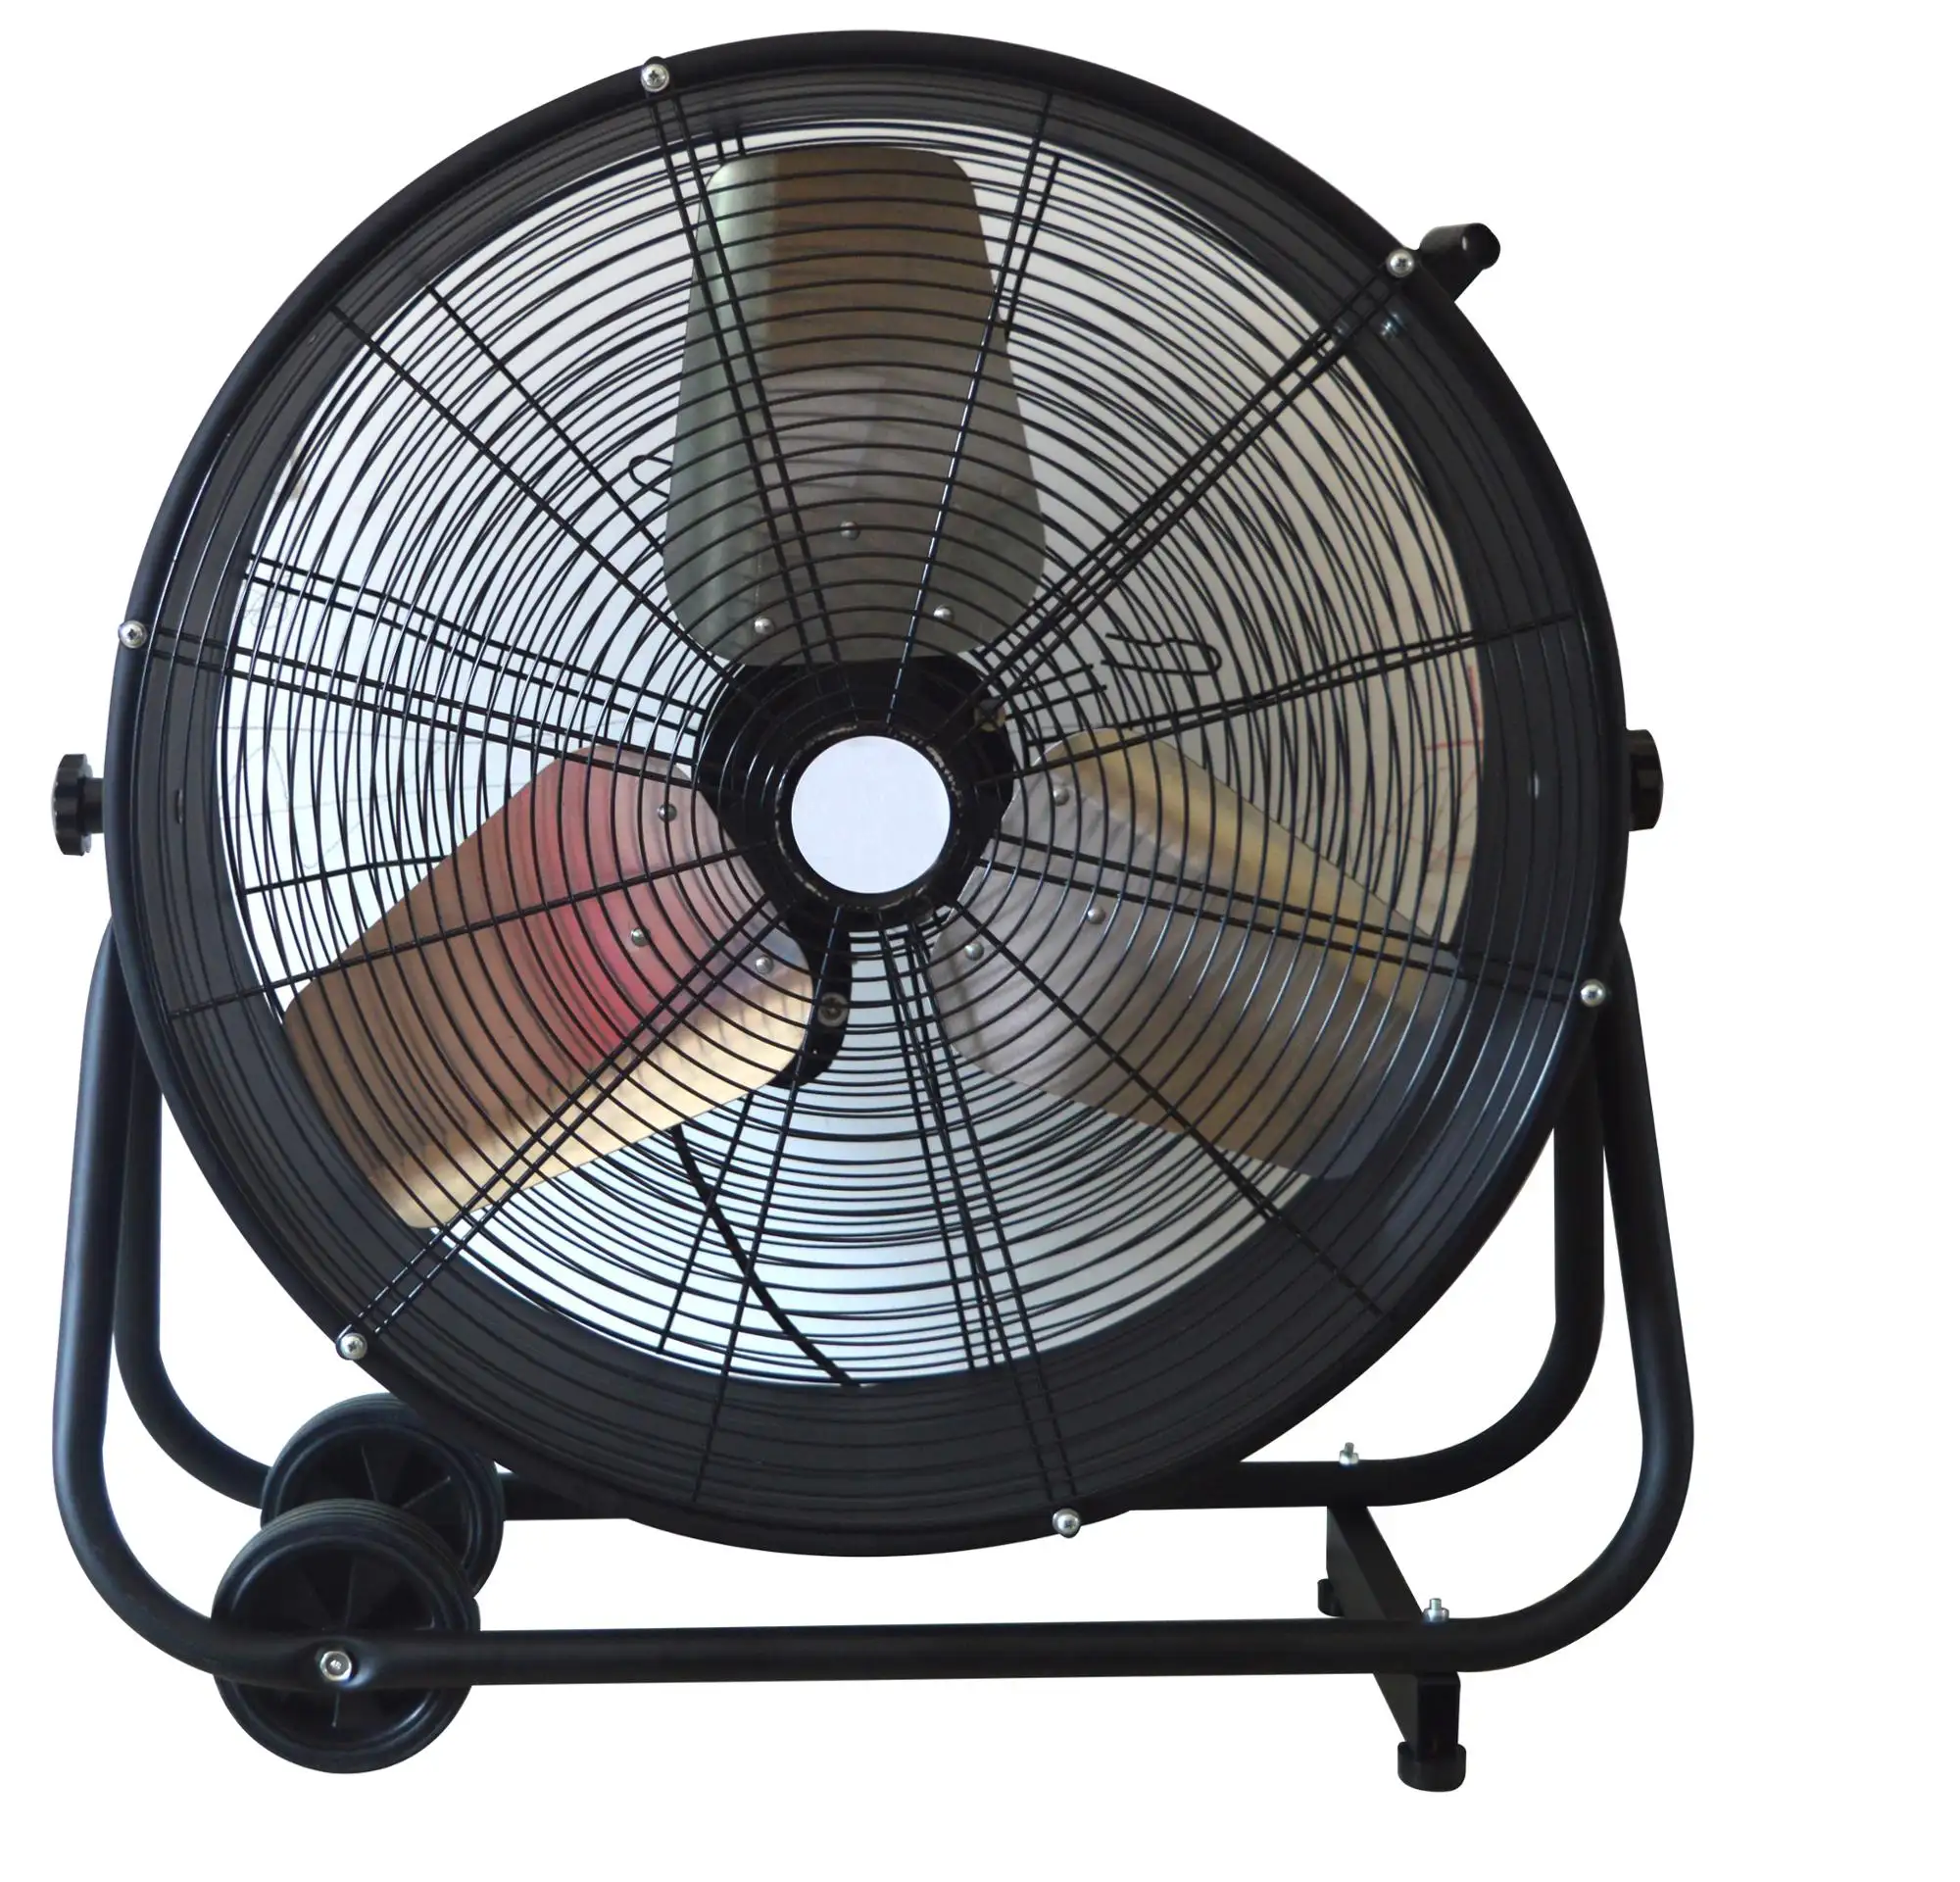 Factory low price 24inch high velocity industrial tilting cooling desk fan with 3 speed adjustable blowing Metal floor fan